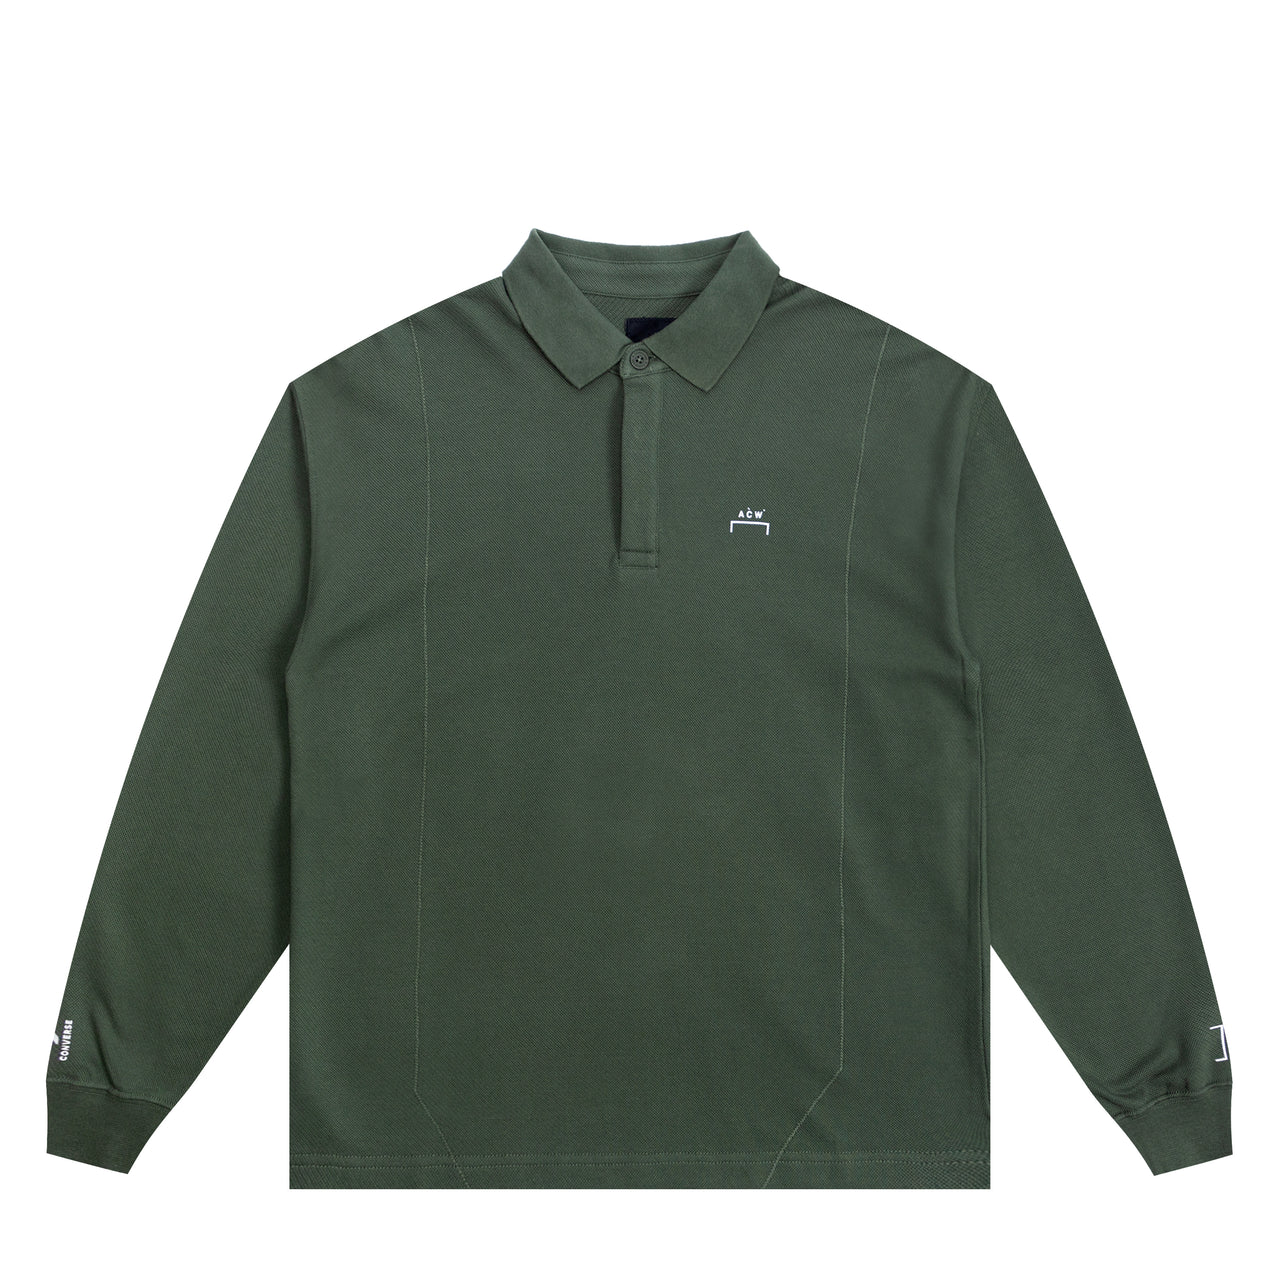 LS POLO / A-COLD-WALL*